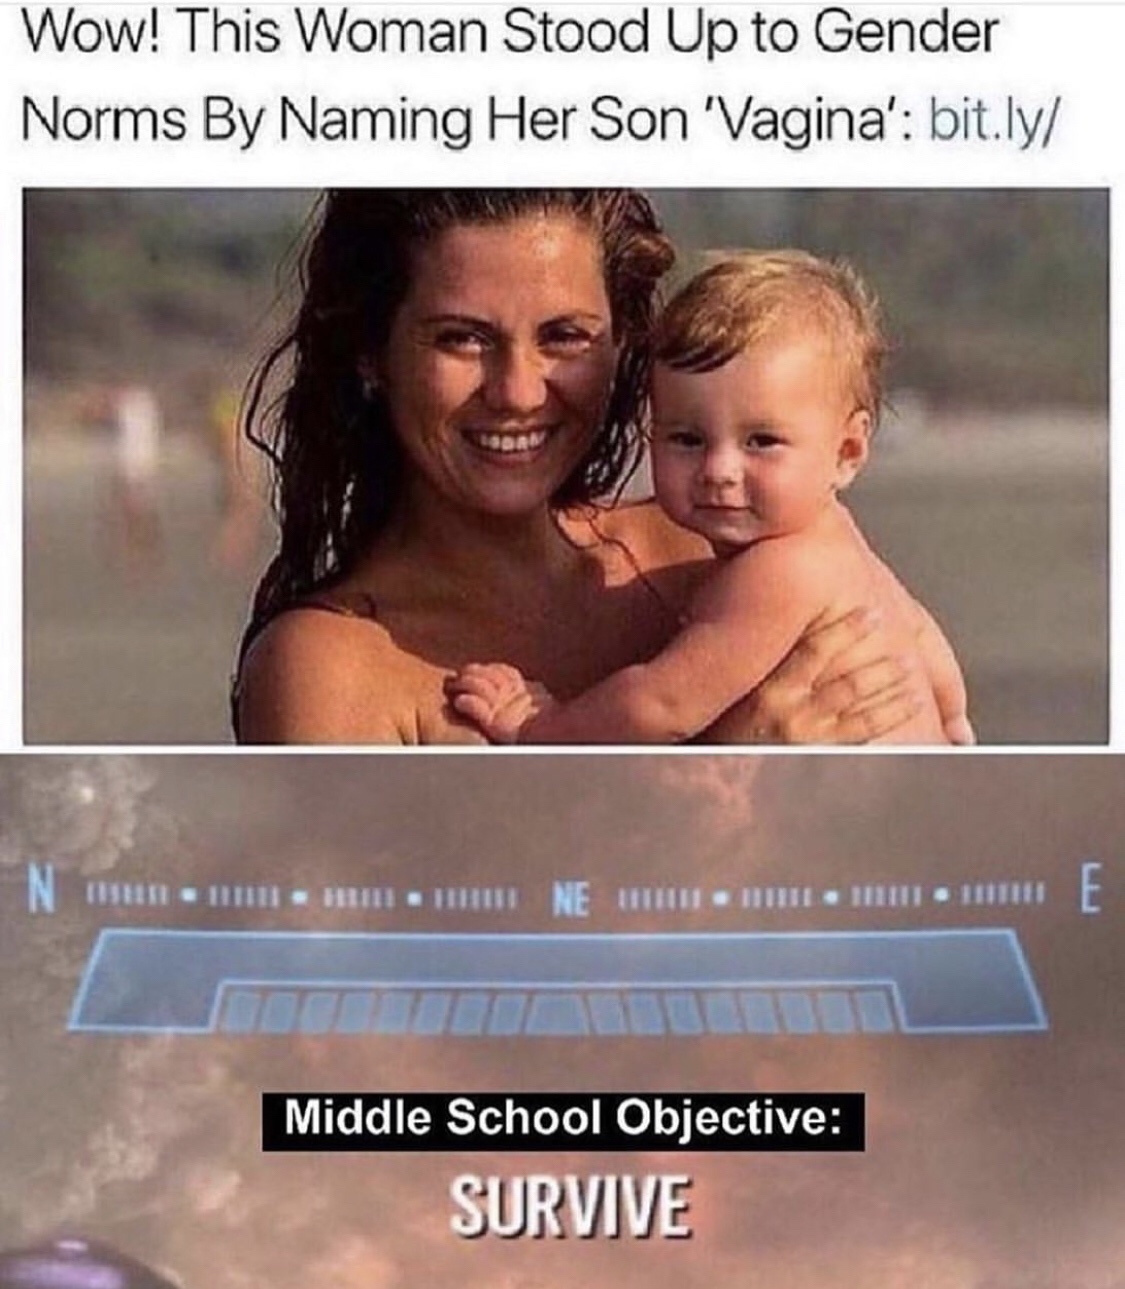 woman stood up to gender norms - Wow! This Woman Stood Up to Gender Norms By Naming Her Son Vagina' bit.ly Nun mm Ne 111 W Hite Middle School Objective Survive